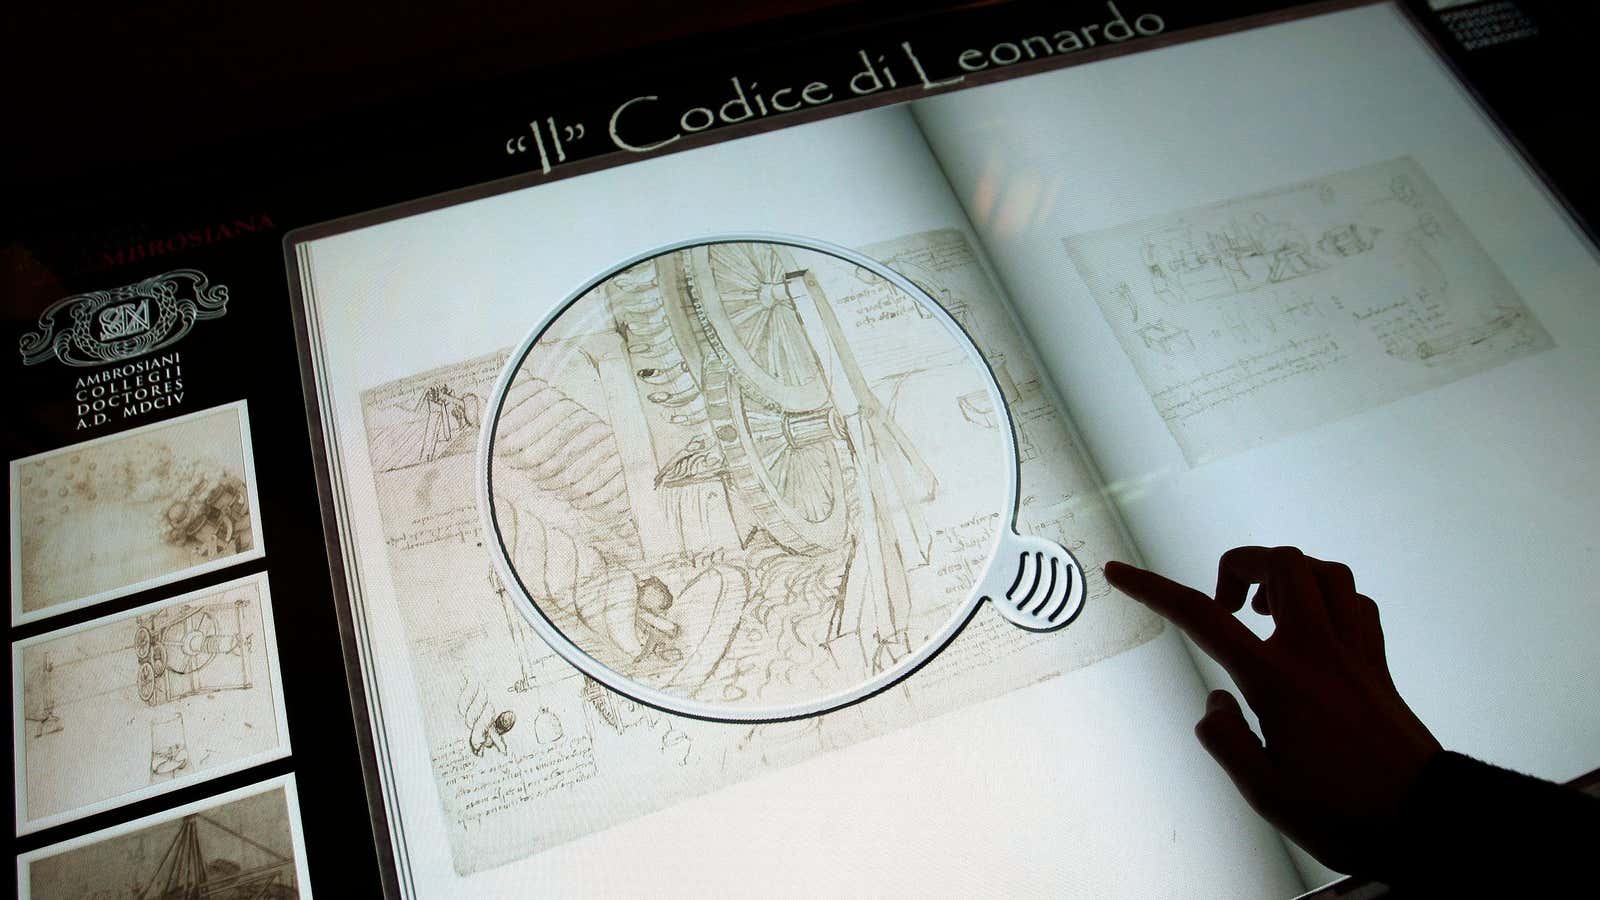 Leonardo da Vinci took on artistic and engineering challenges that built on his knowledge of geology, weather, hydrology, botany, and much more.